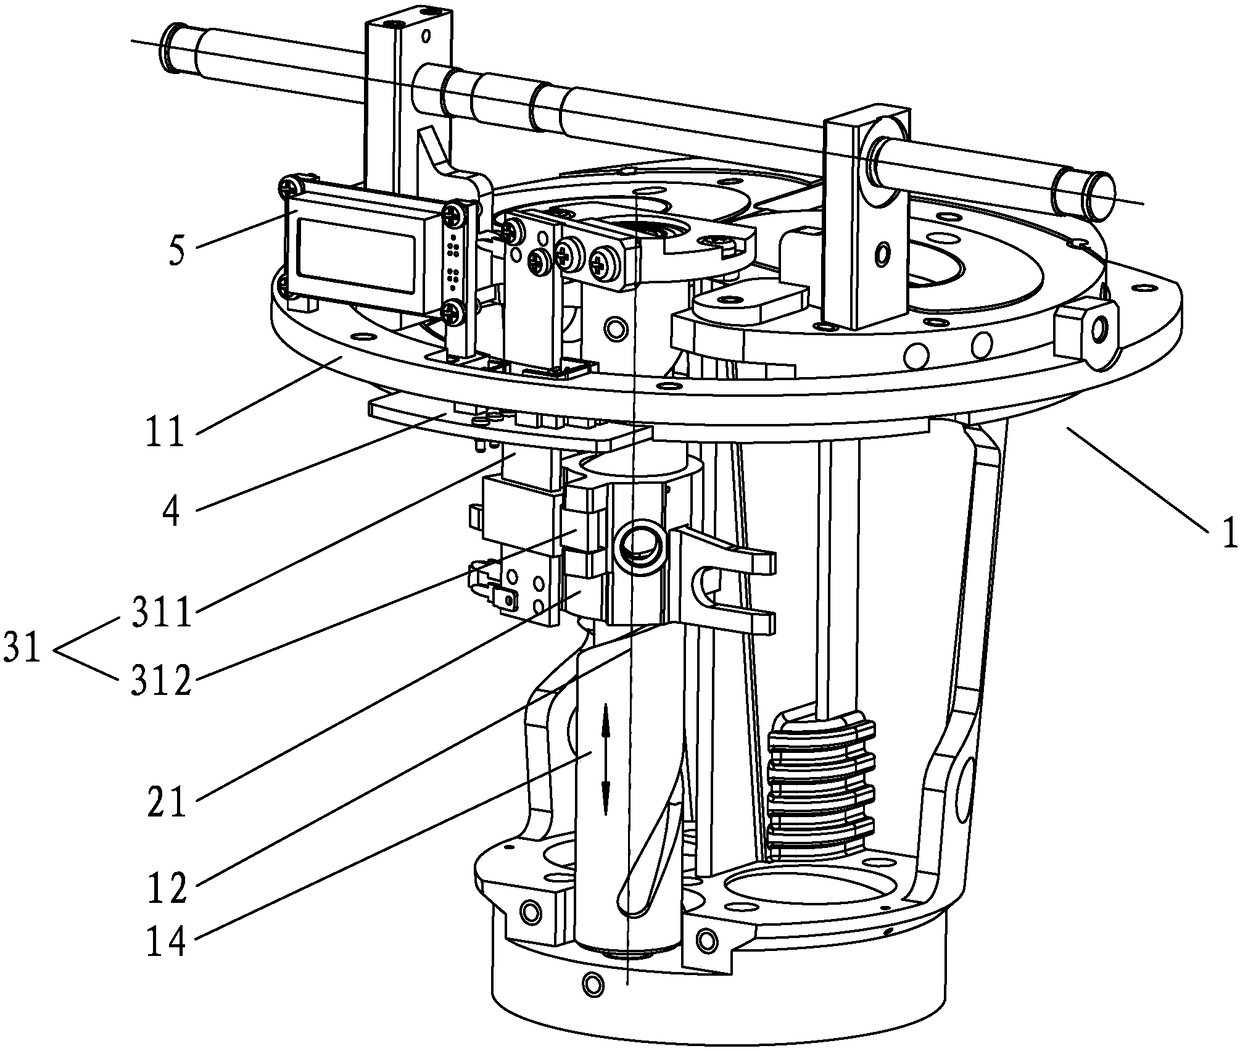 A Continuous Position Recognition Device for Microscope